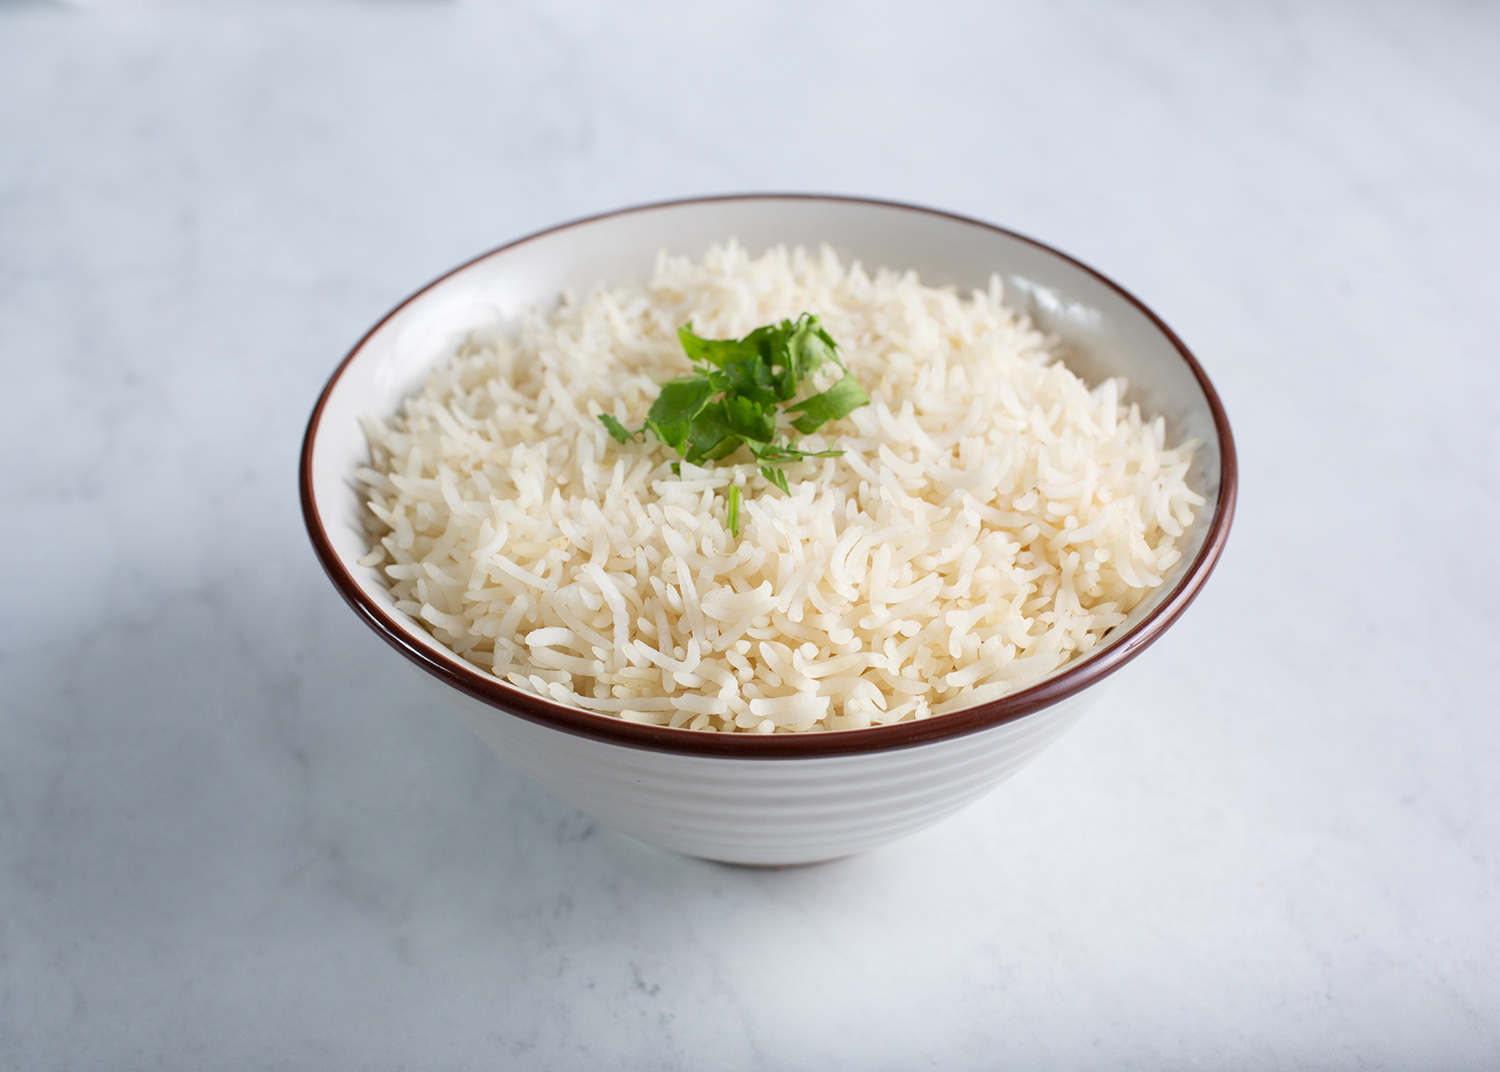 A view of a bowl of basmati rice.